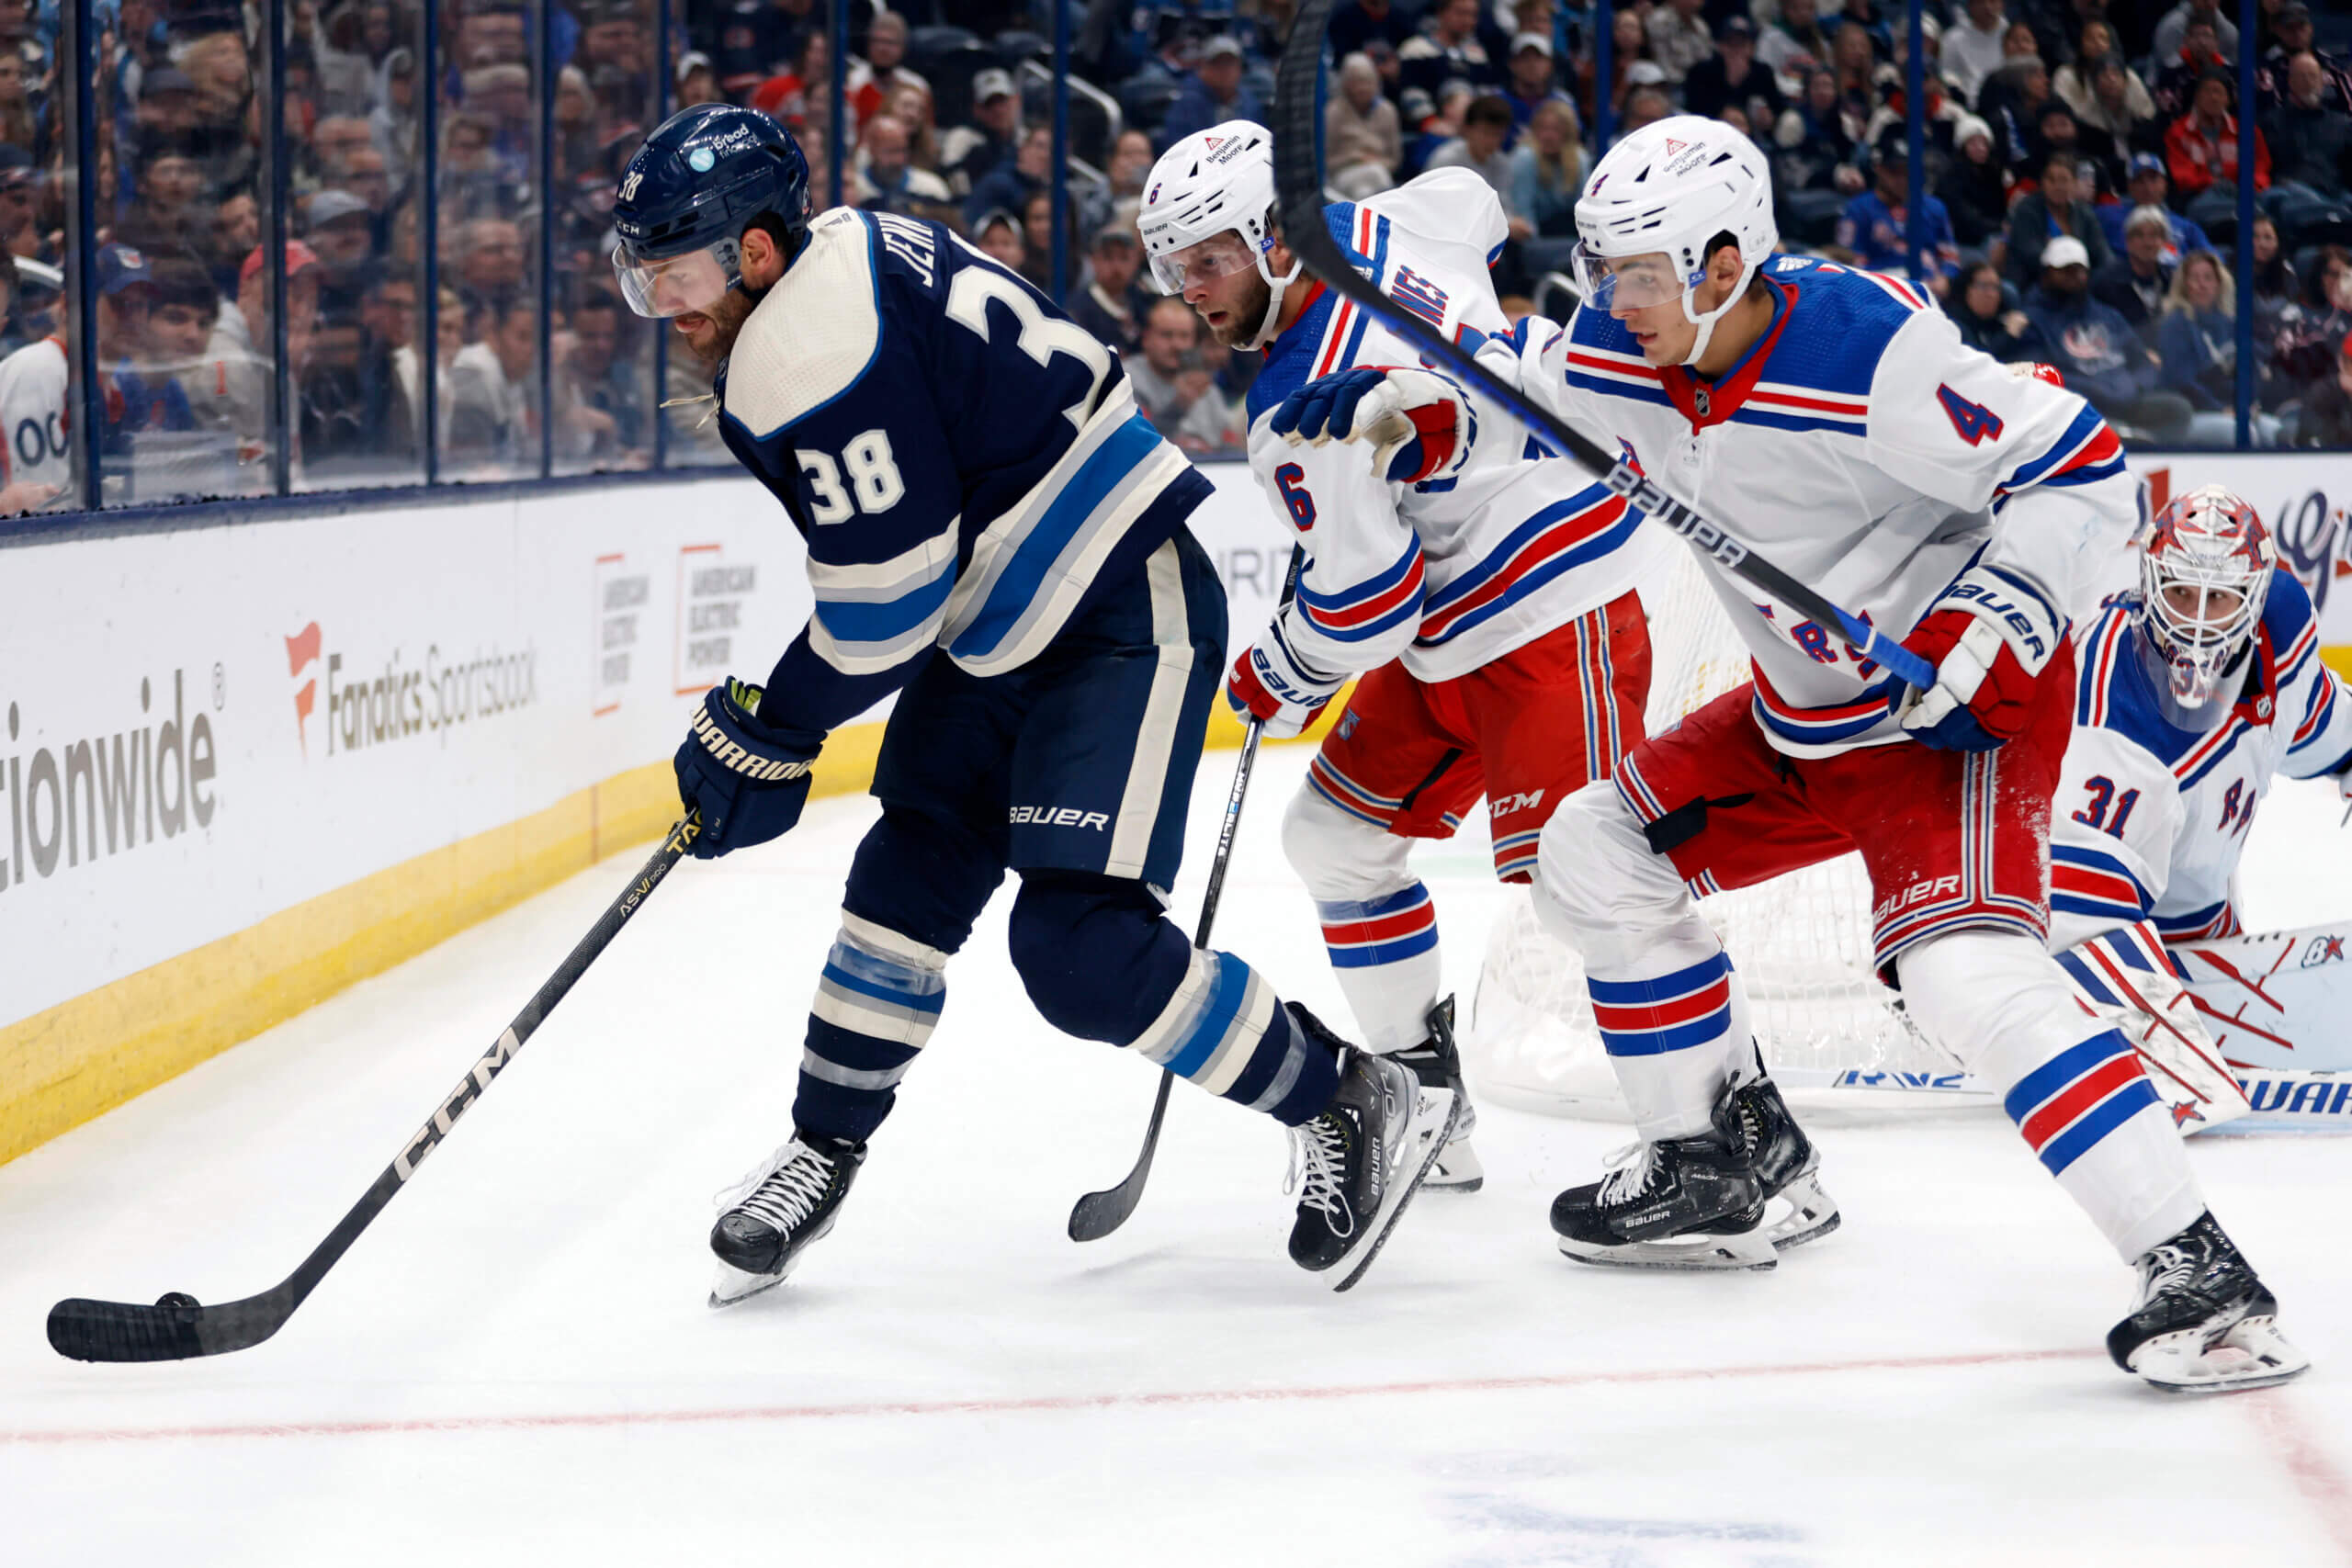 Columbus Blue Jackets down New York Rangers on Boone Jenner hat trick